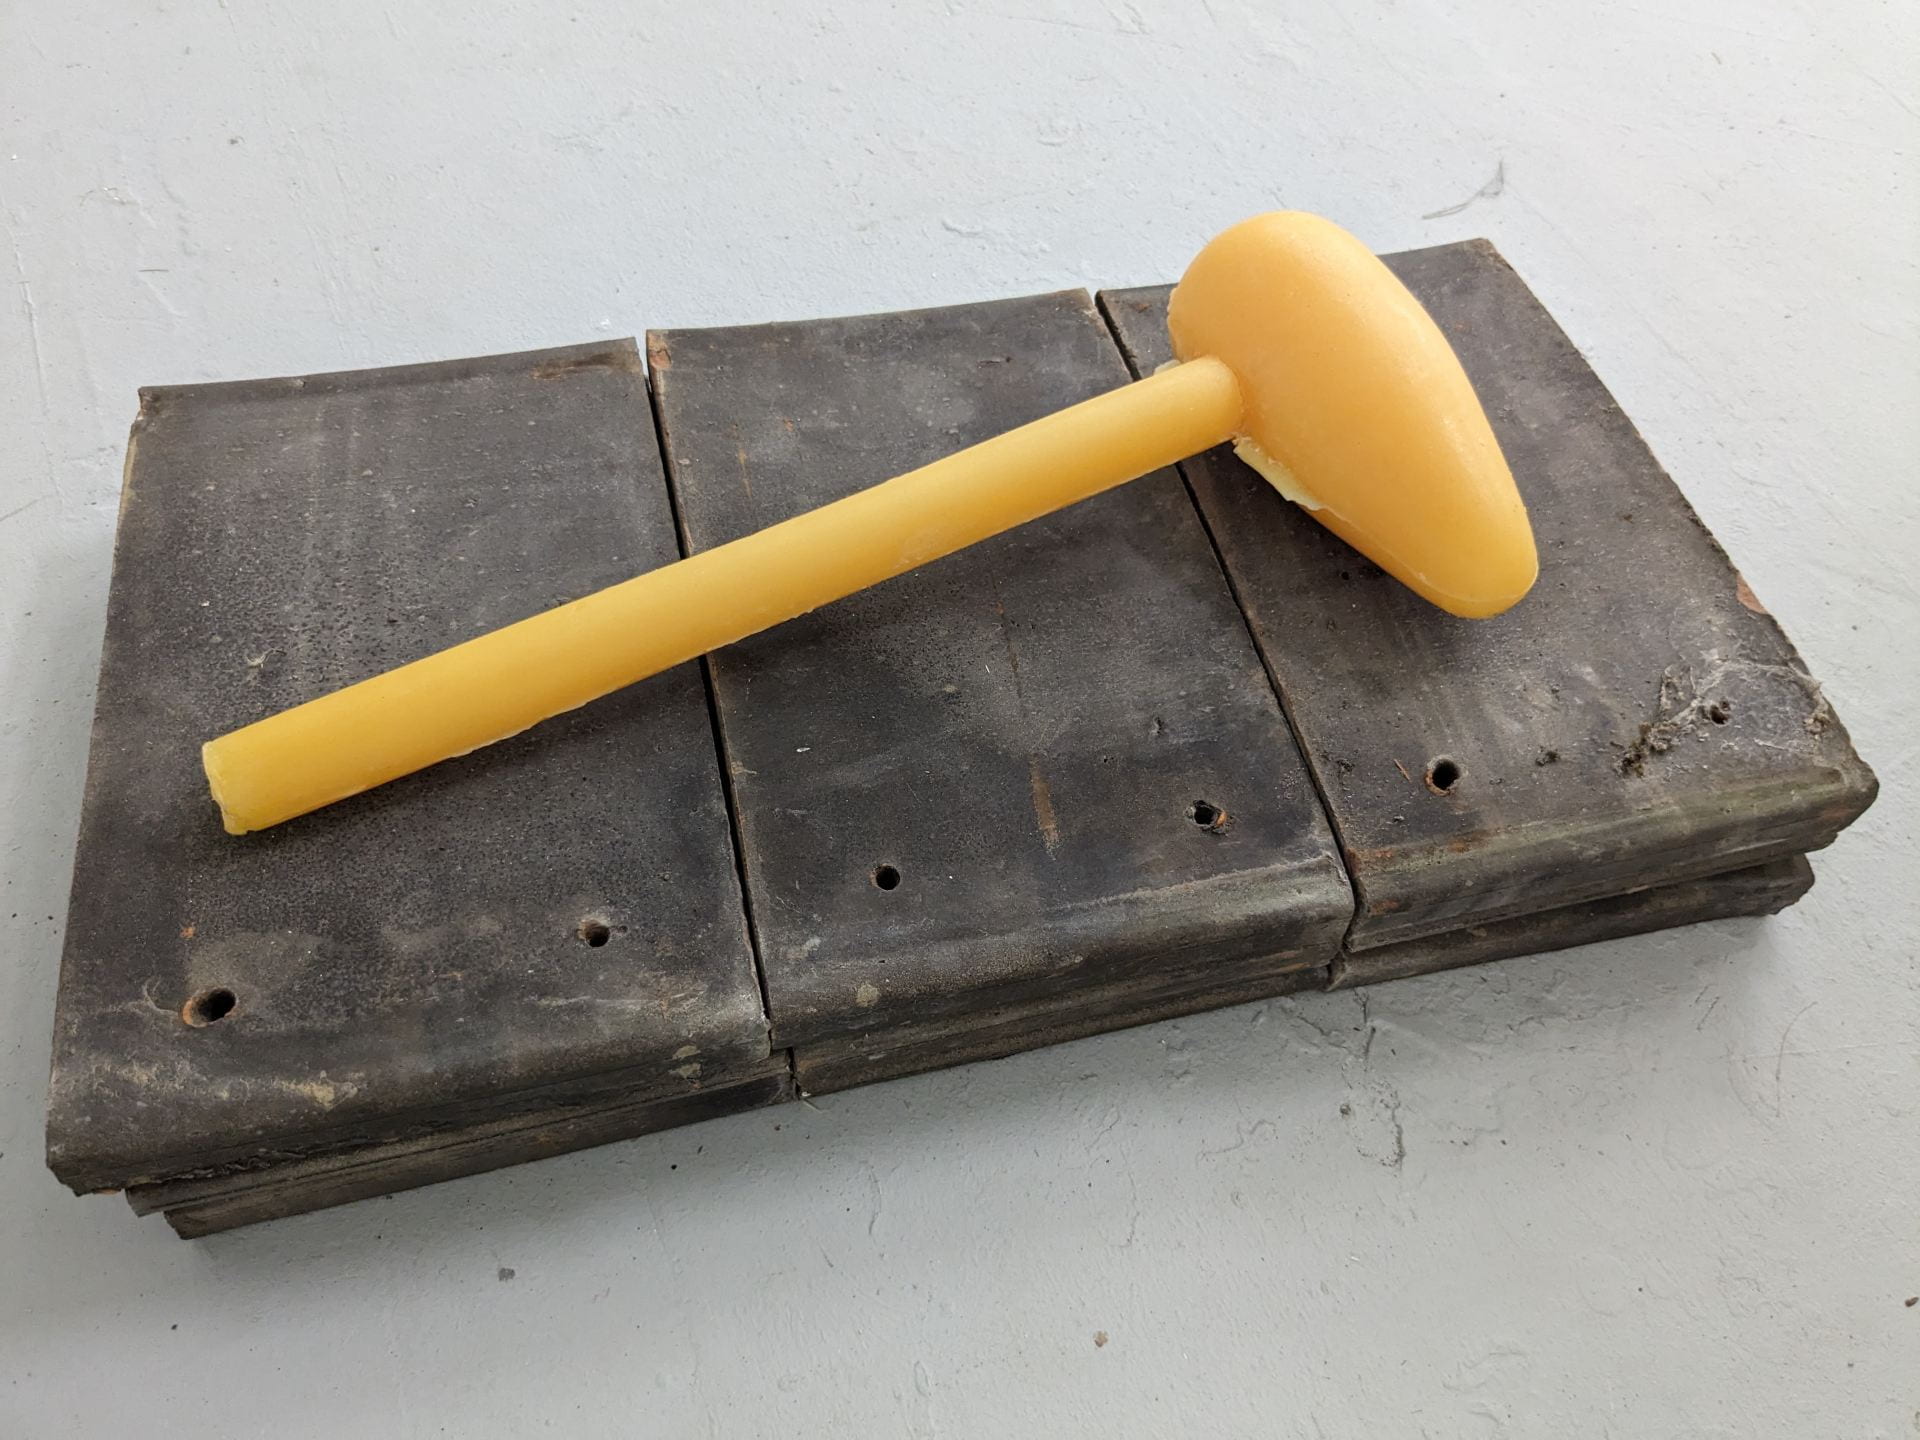 An image of a wax mallet sat on some wooden flooring.